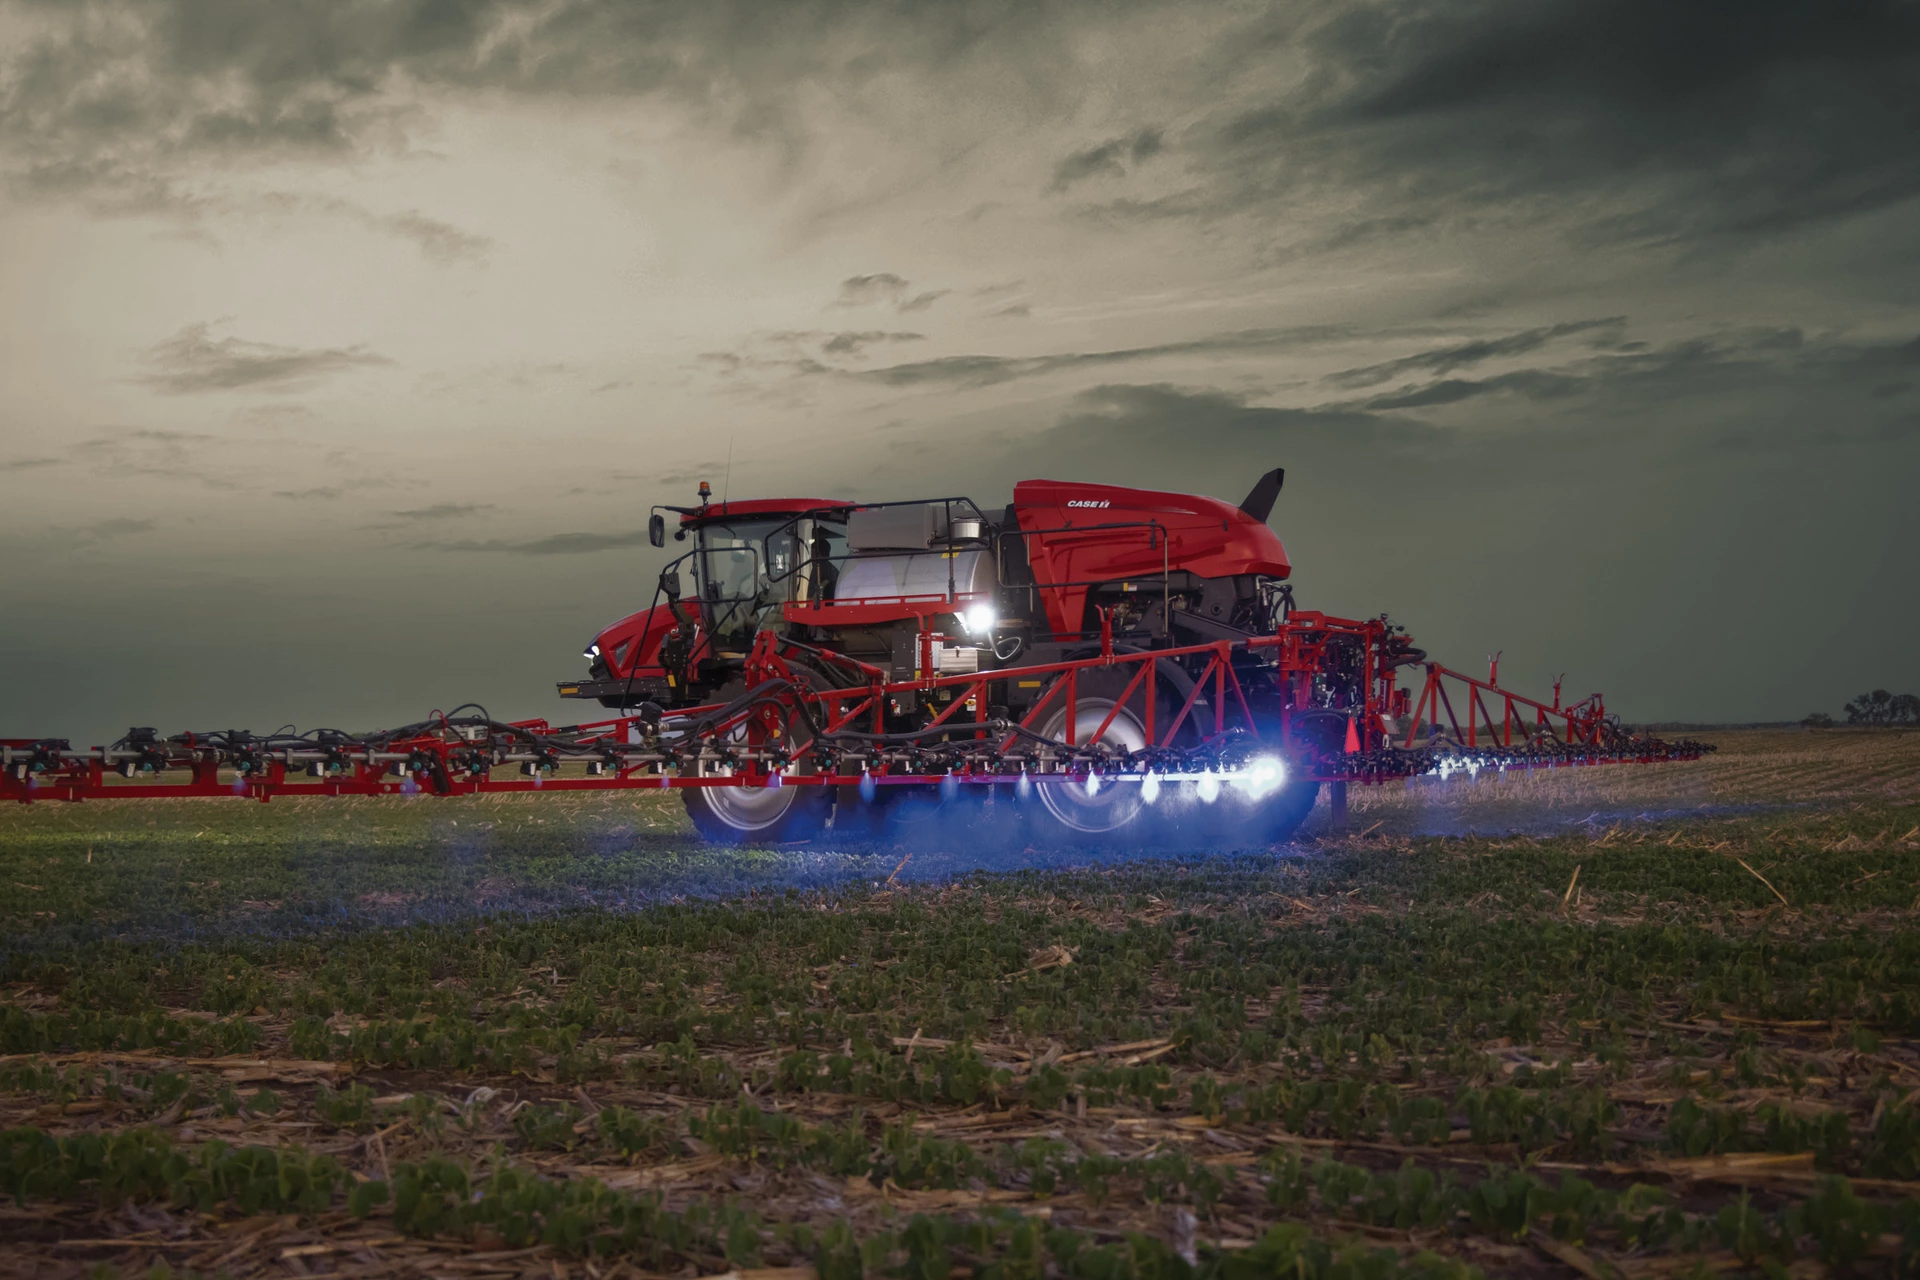 Additional Control Solutions hero Image with Patriot Sprayer